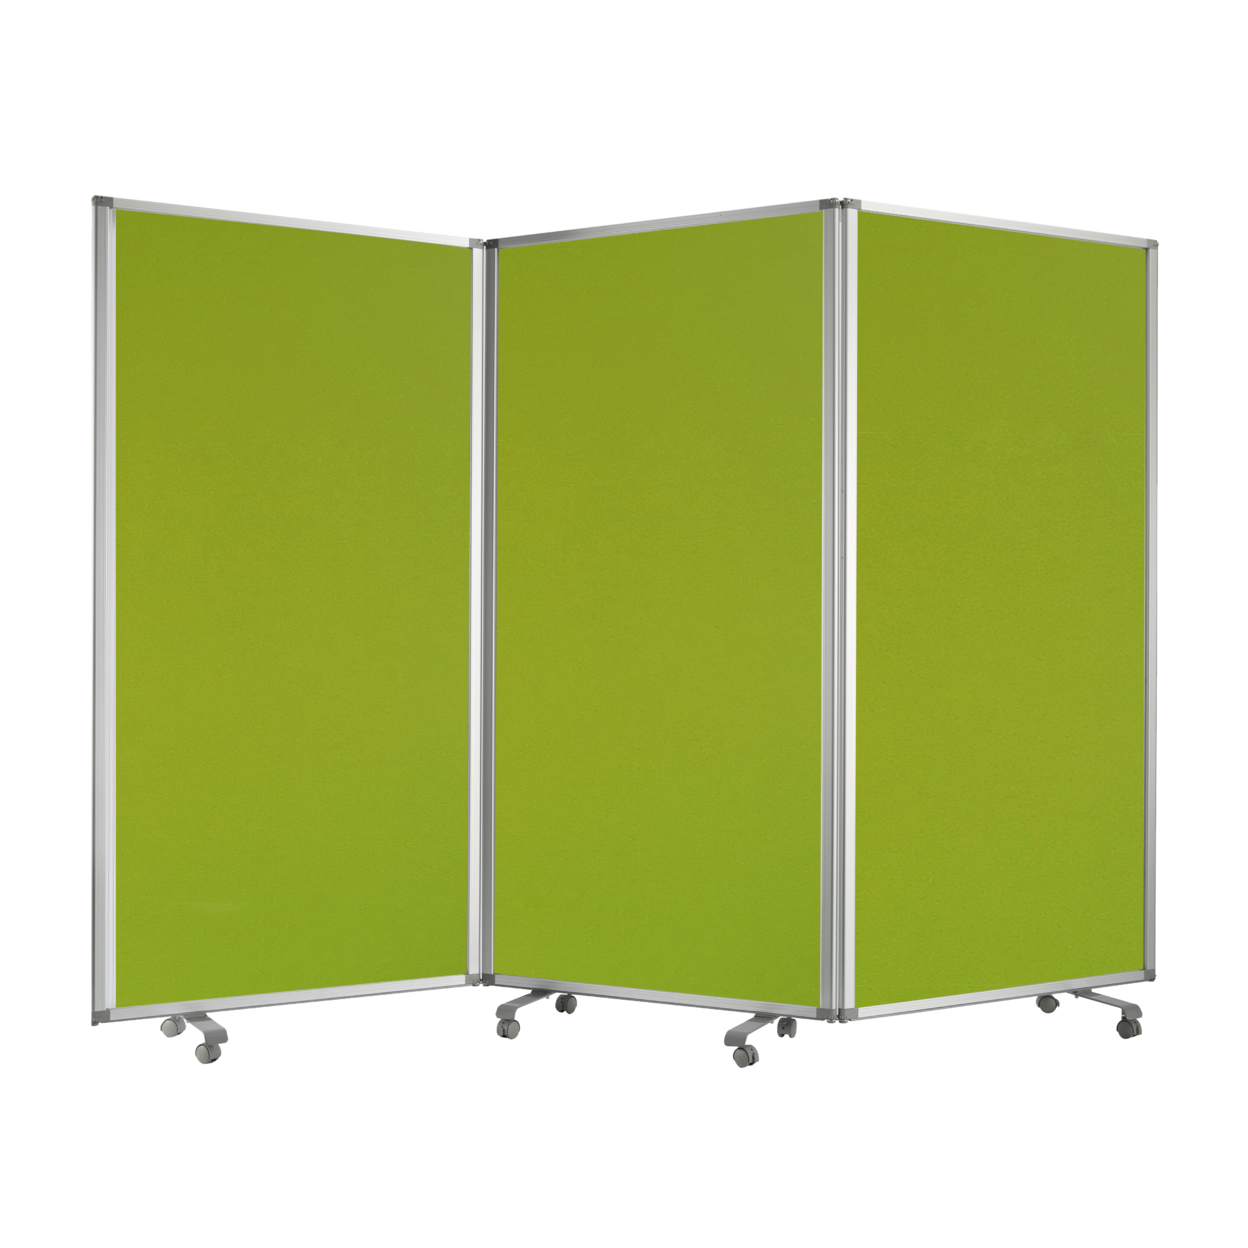 Accordion Style Fabric Upholstered 3 Panel Room Divider, Green And Gray- Saltoro Sherpi